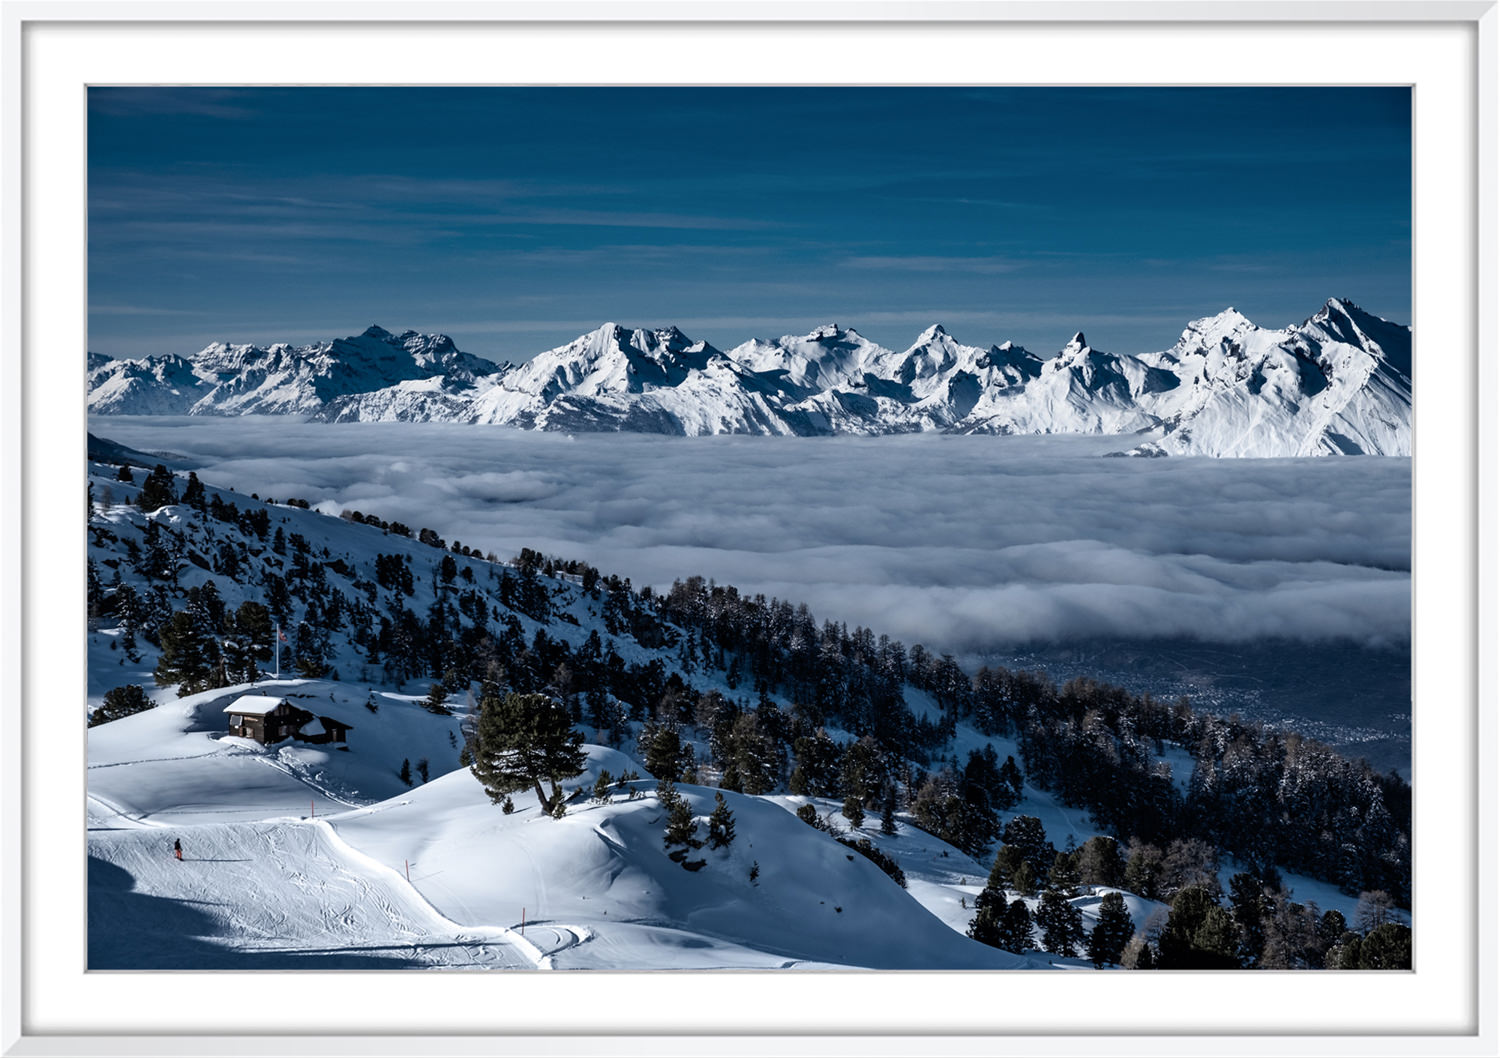 View to Swiss alps and Rhone valey from Nax ski resort and station